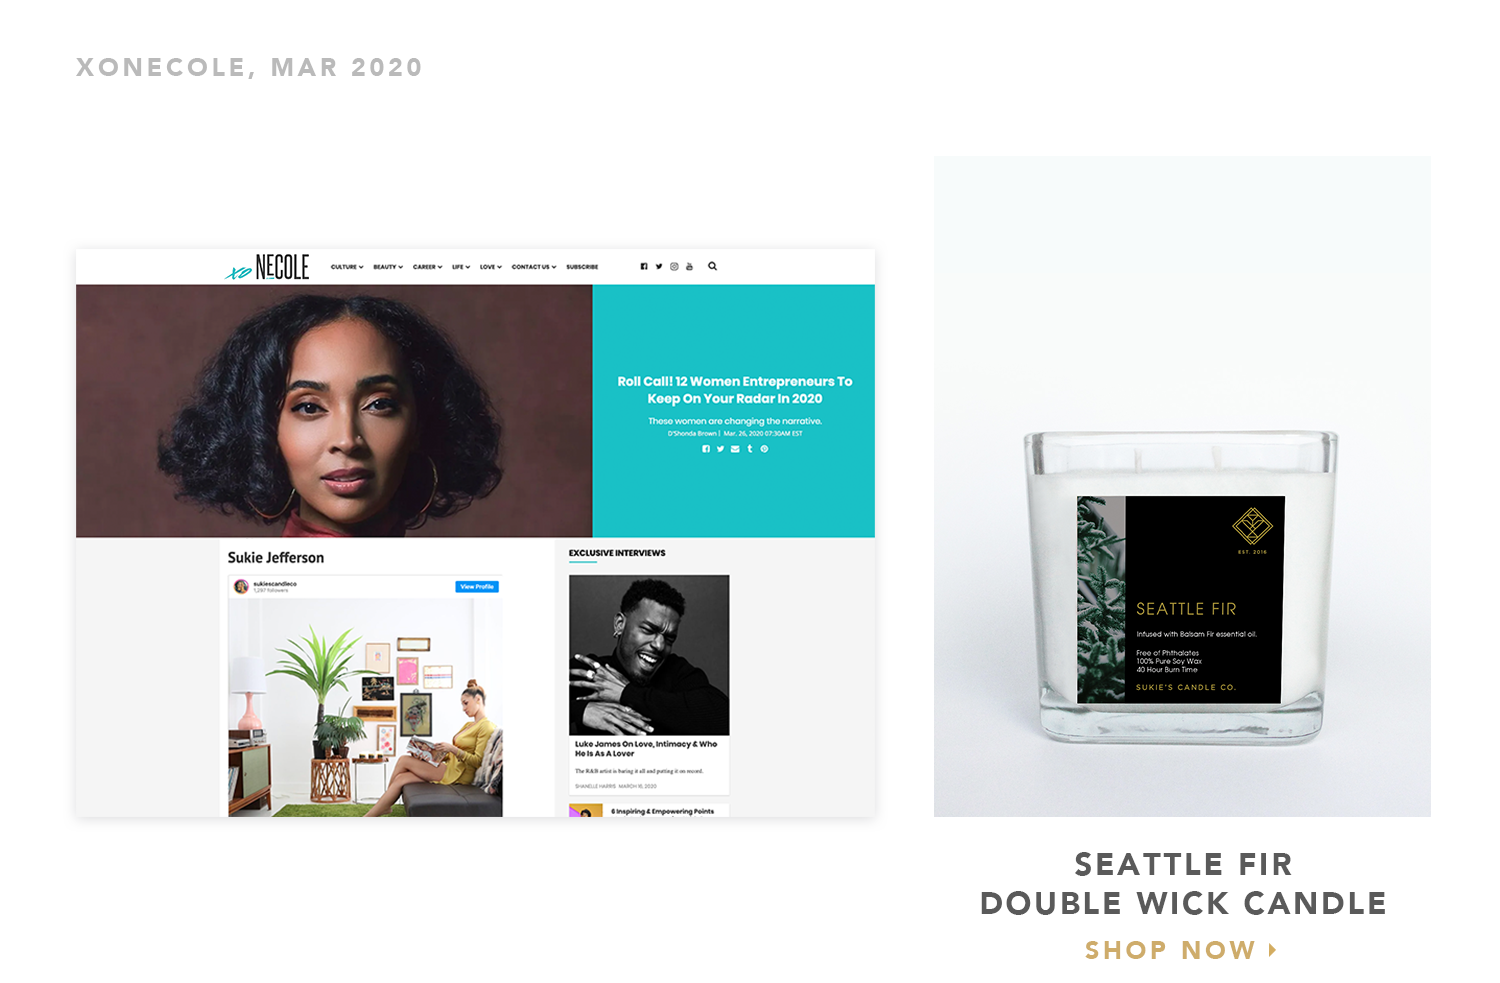 Sukie Jefferson from Sukie's Candle Co. featured in xoNecole March 2020